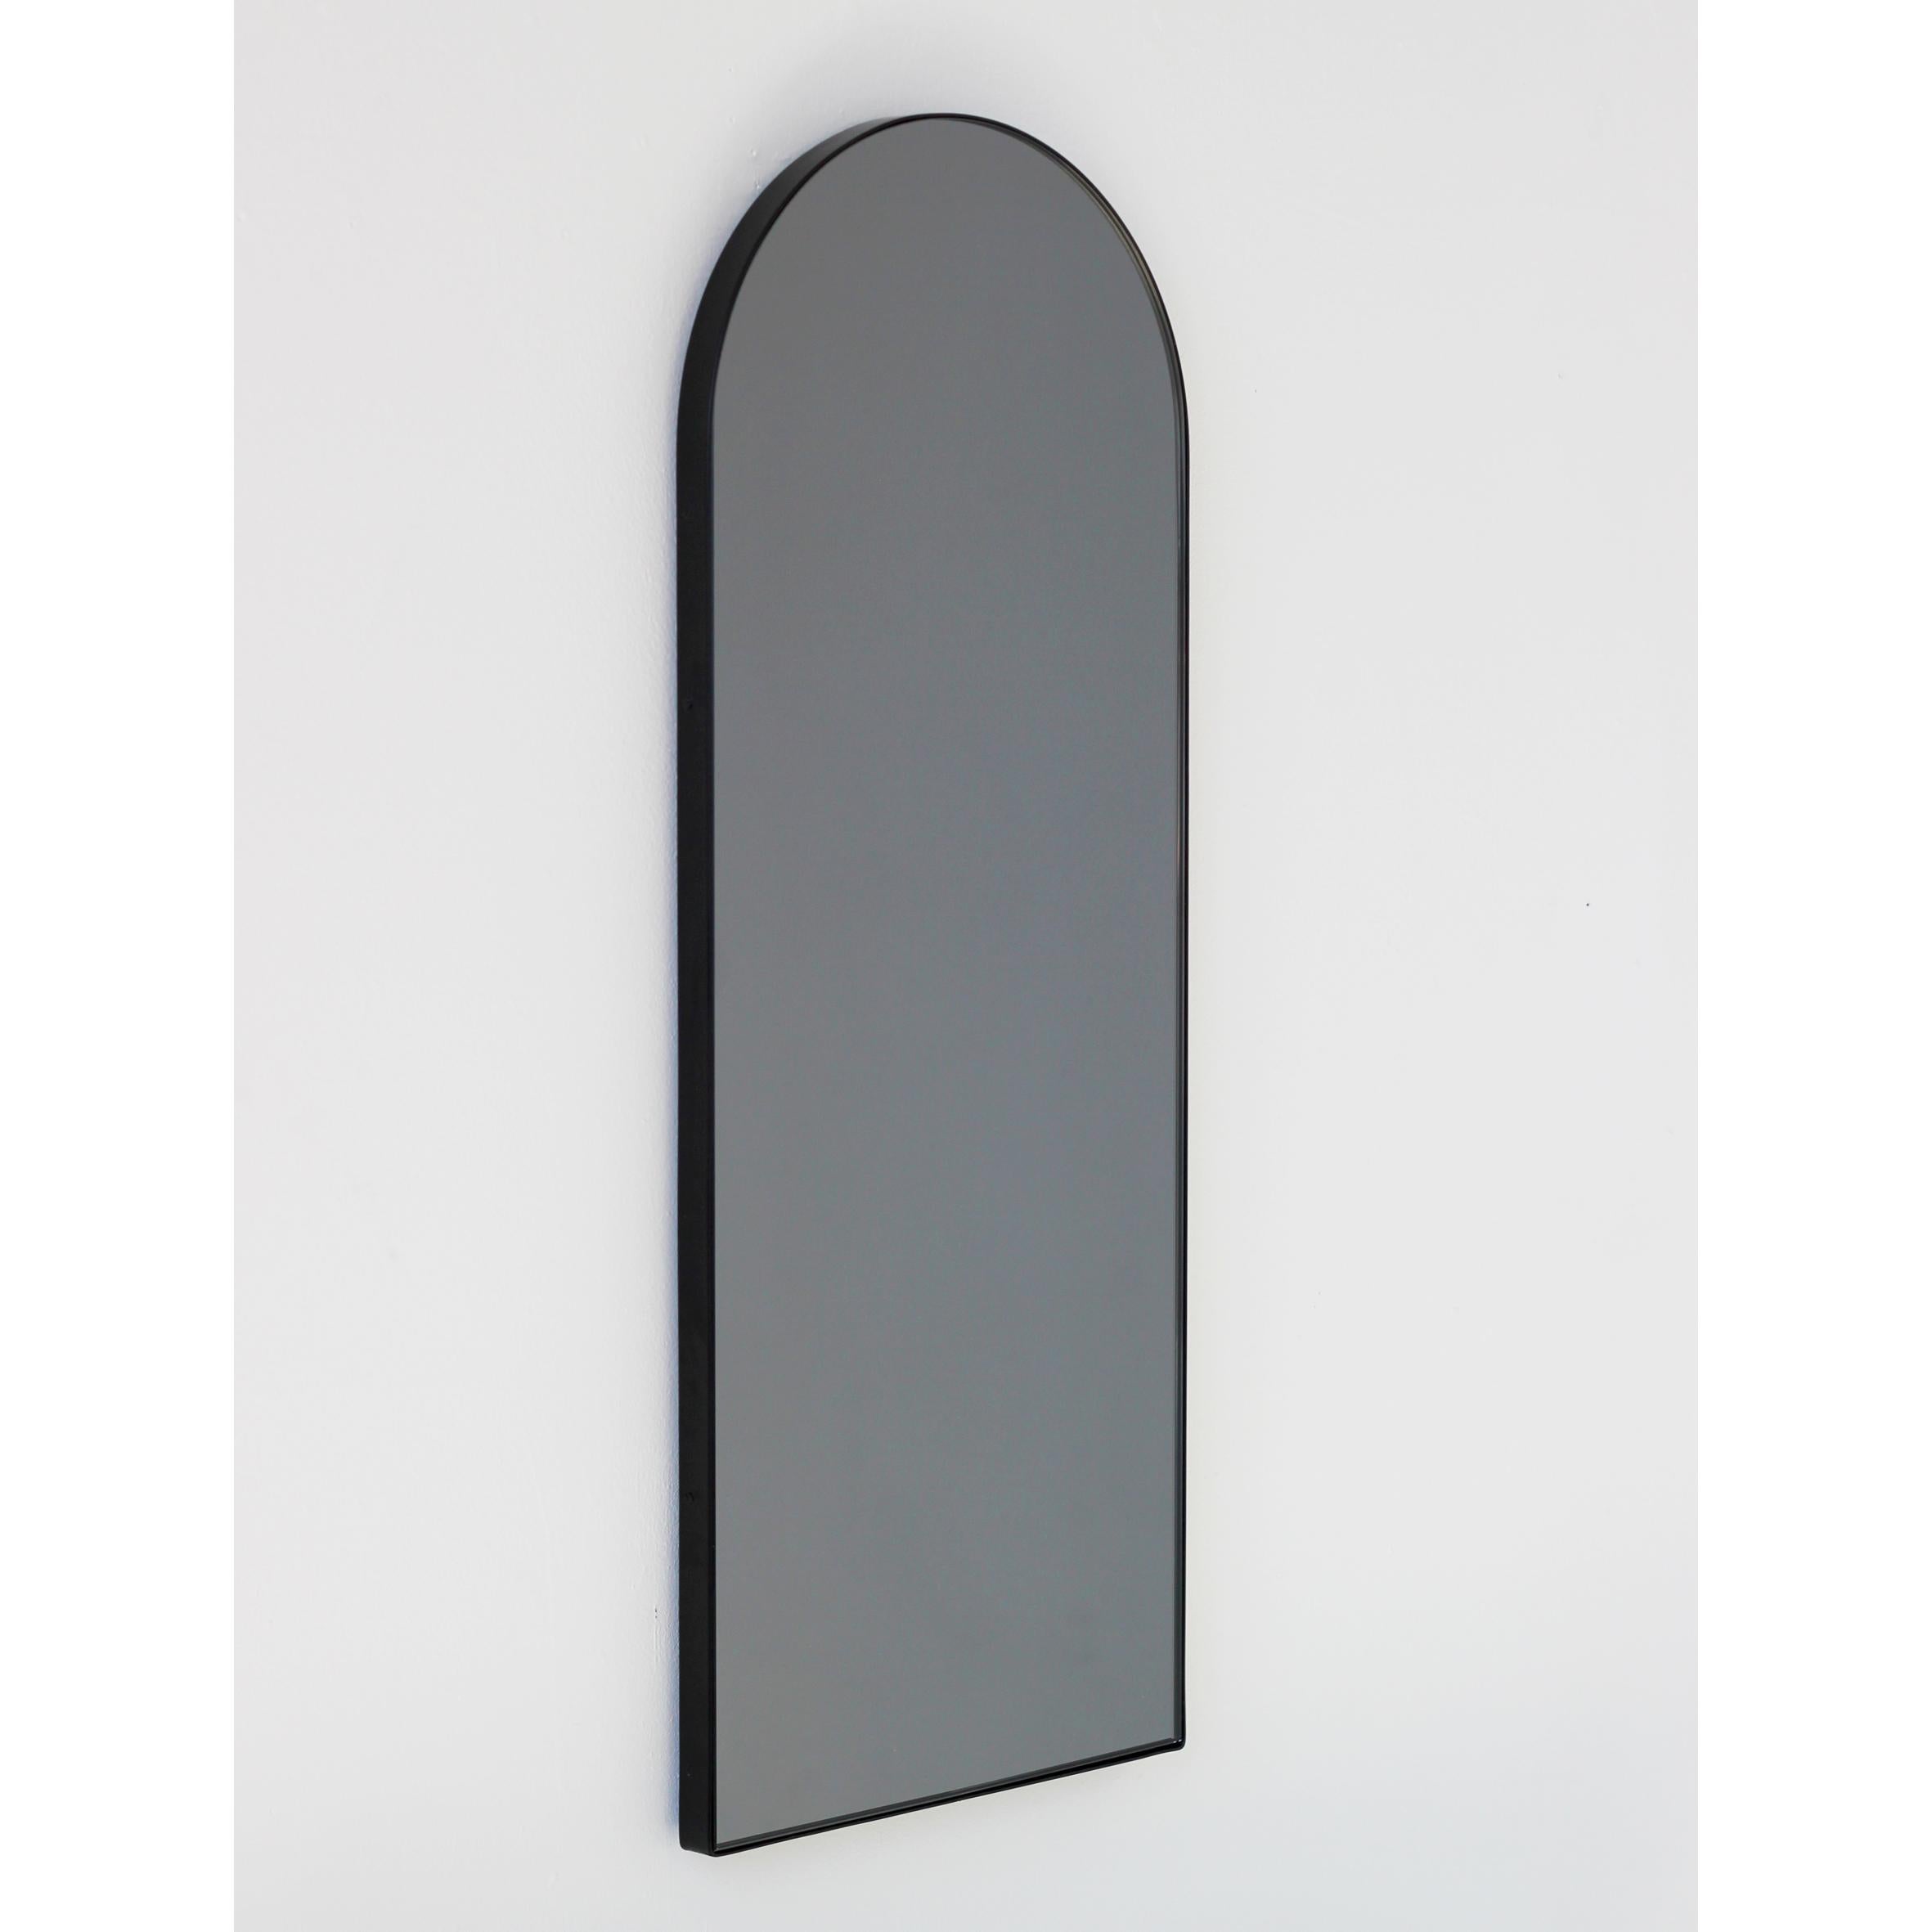 Contemporary arch shaped black tinted mirror with an elegant black frame. Designed and handcrafted in London, UK.

Medium, large and extra-large (37cm x 56cm, 46cm x 71cm and 48cm x 97cm) mirrors are fitted with an ingenious French cleat (split